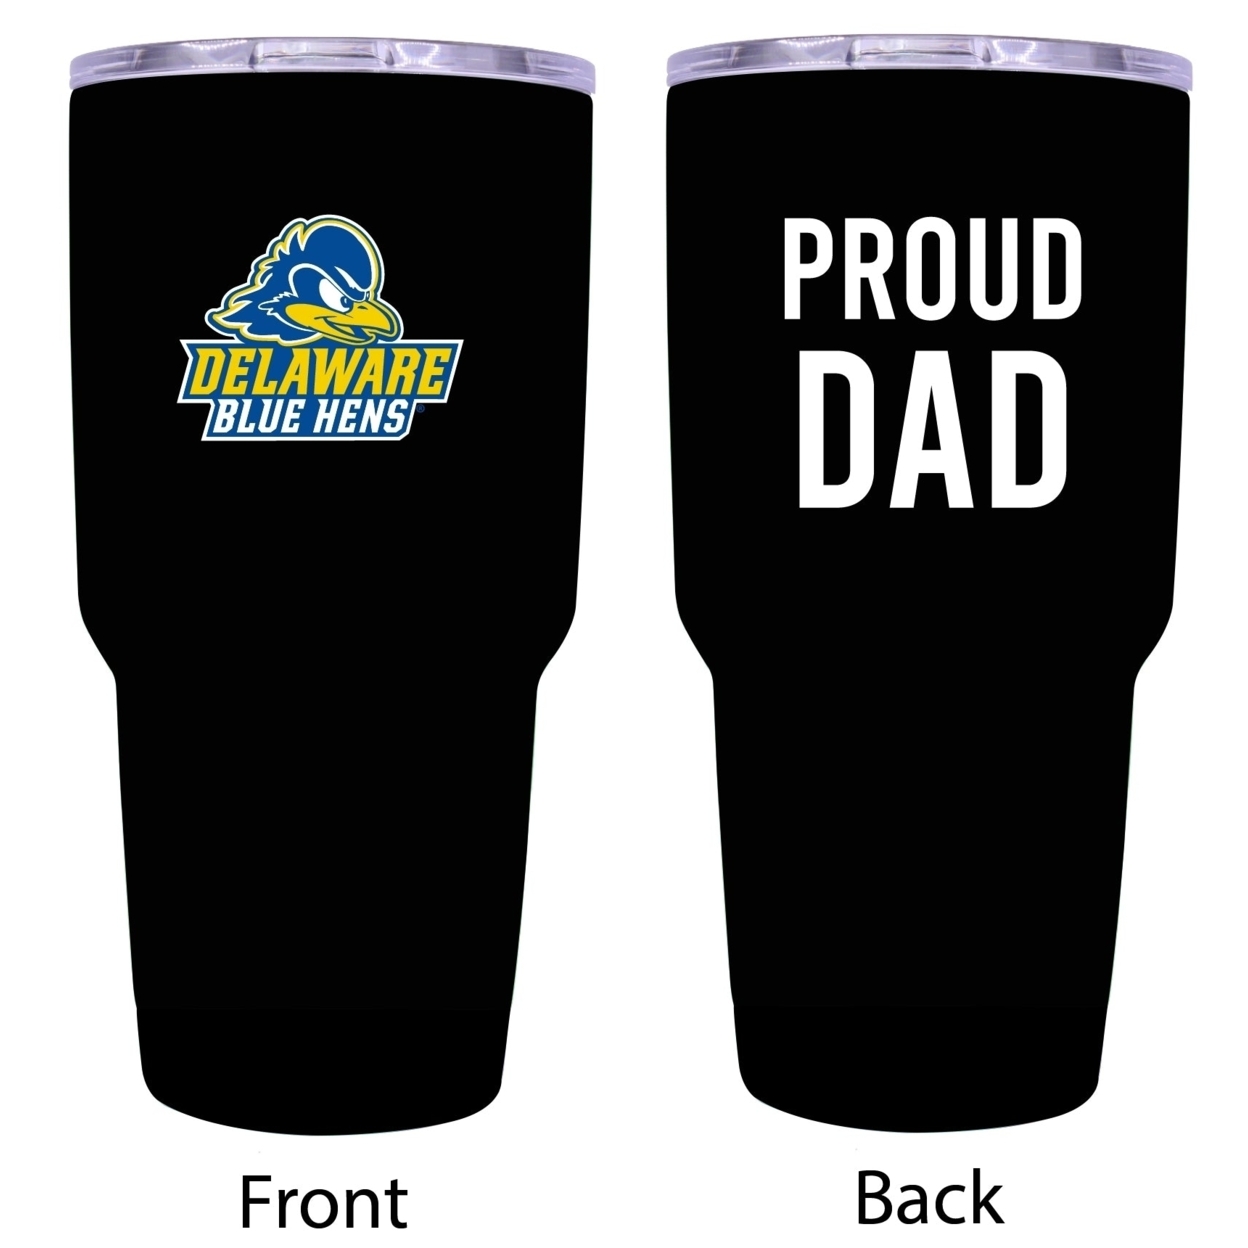 R And R Imports Delaware Blue Hens Proud Dad 24 Oz Insulated Stainless Steel Tumblers Black.